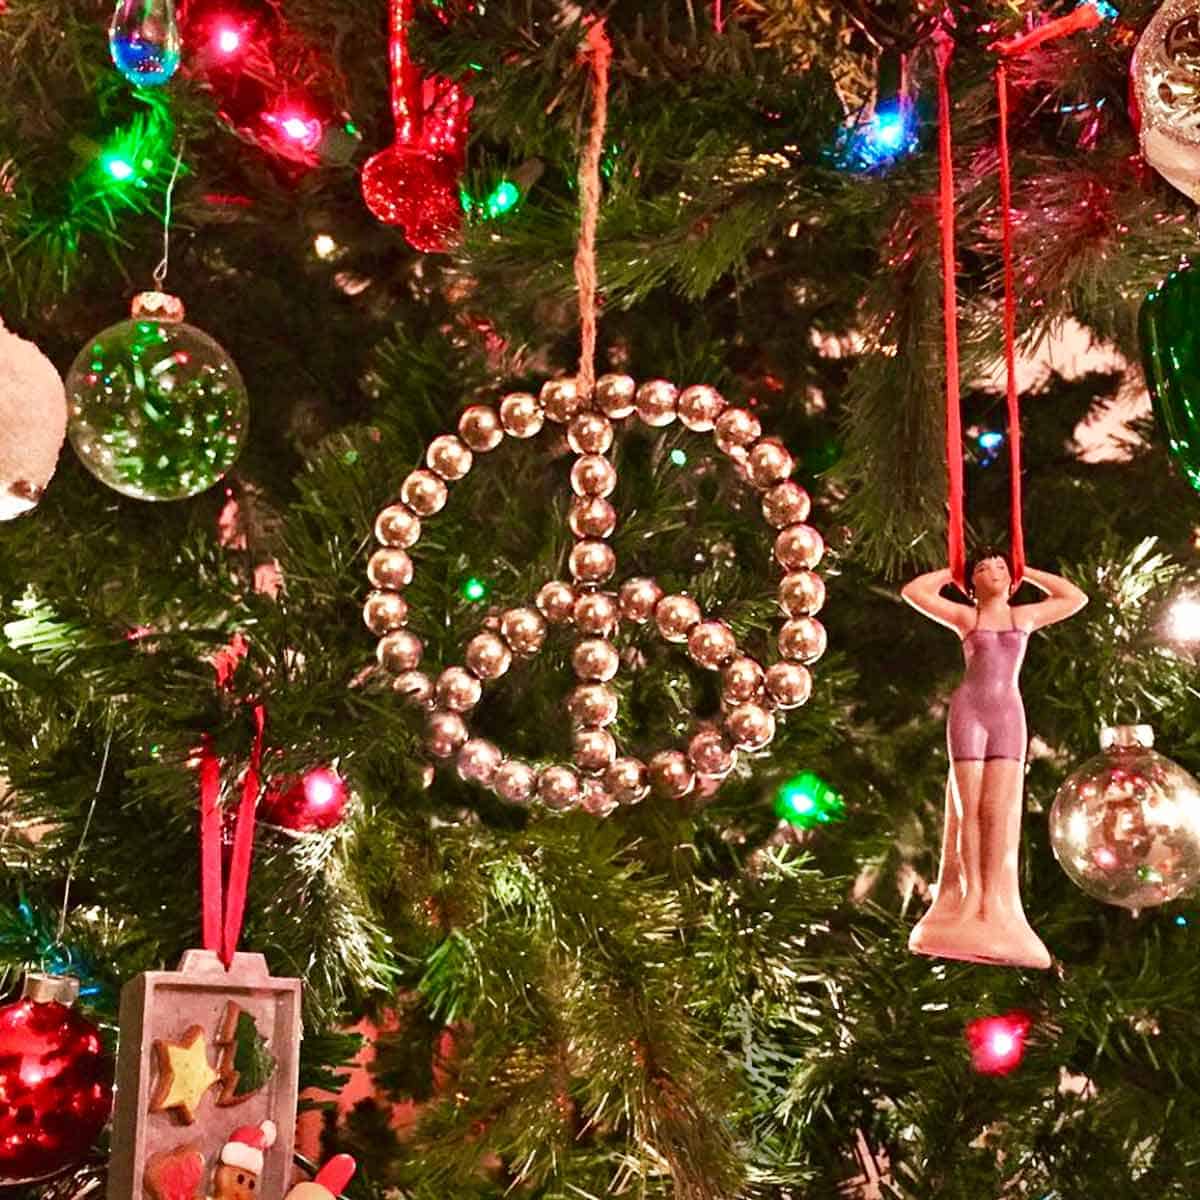 A peace sign ornament on a decorated Christmas tree.